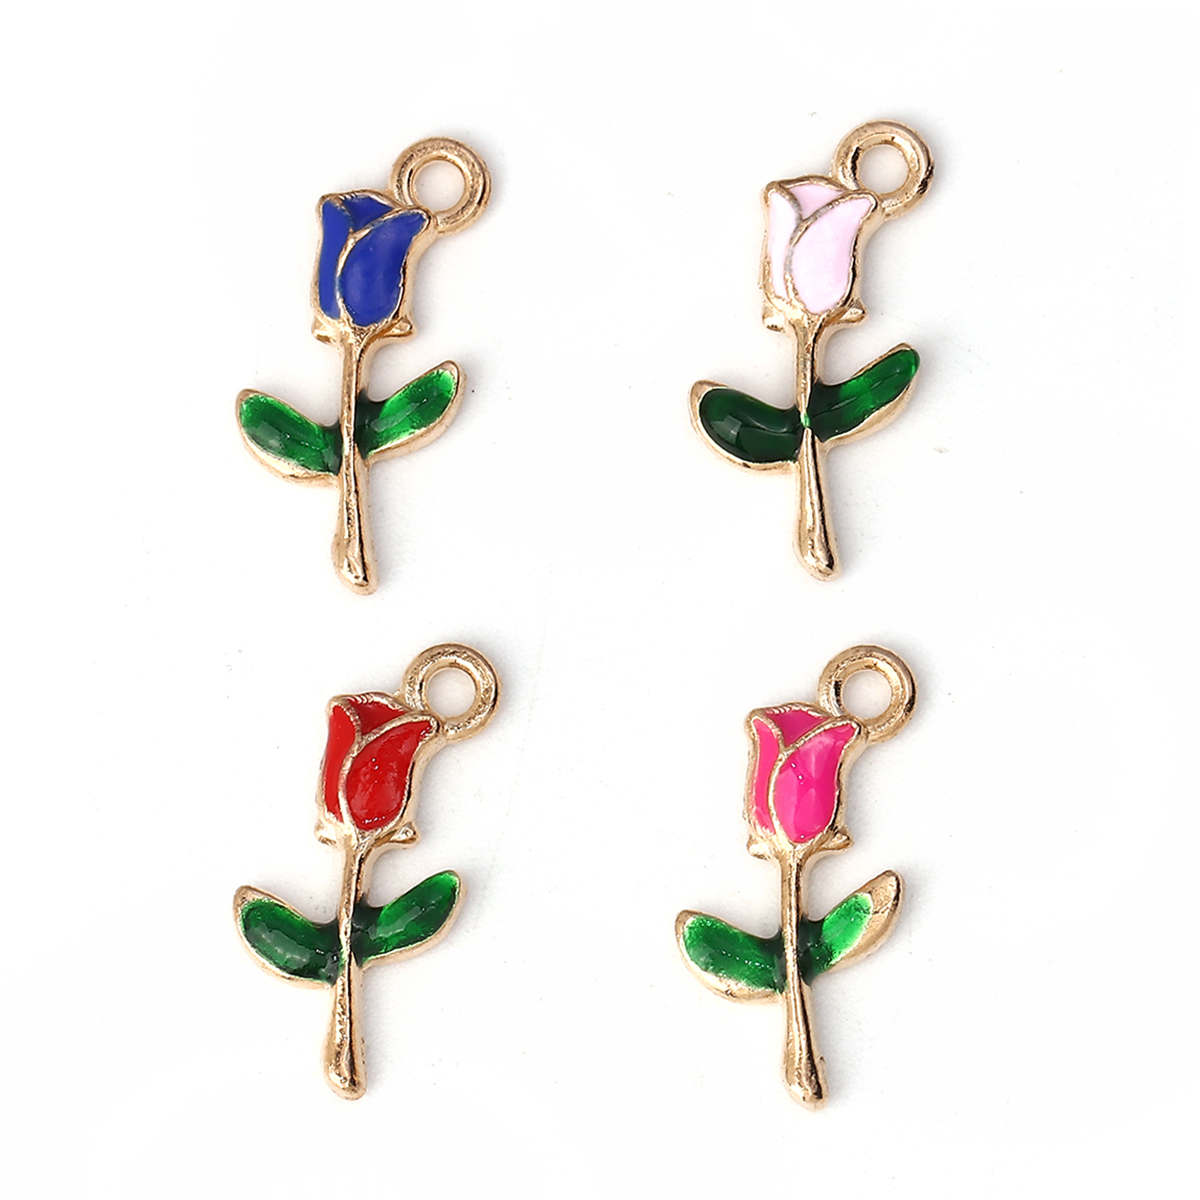 Picture of Zinc Based Alloy Charms Rose Flower Gold Plated Royal Blue Enamel 19mm( 6/8") x 10mm( 3/8"), 30 PCs